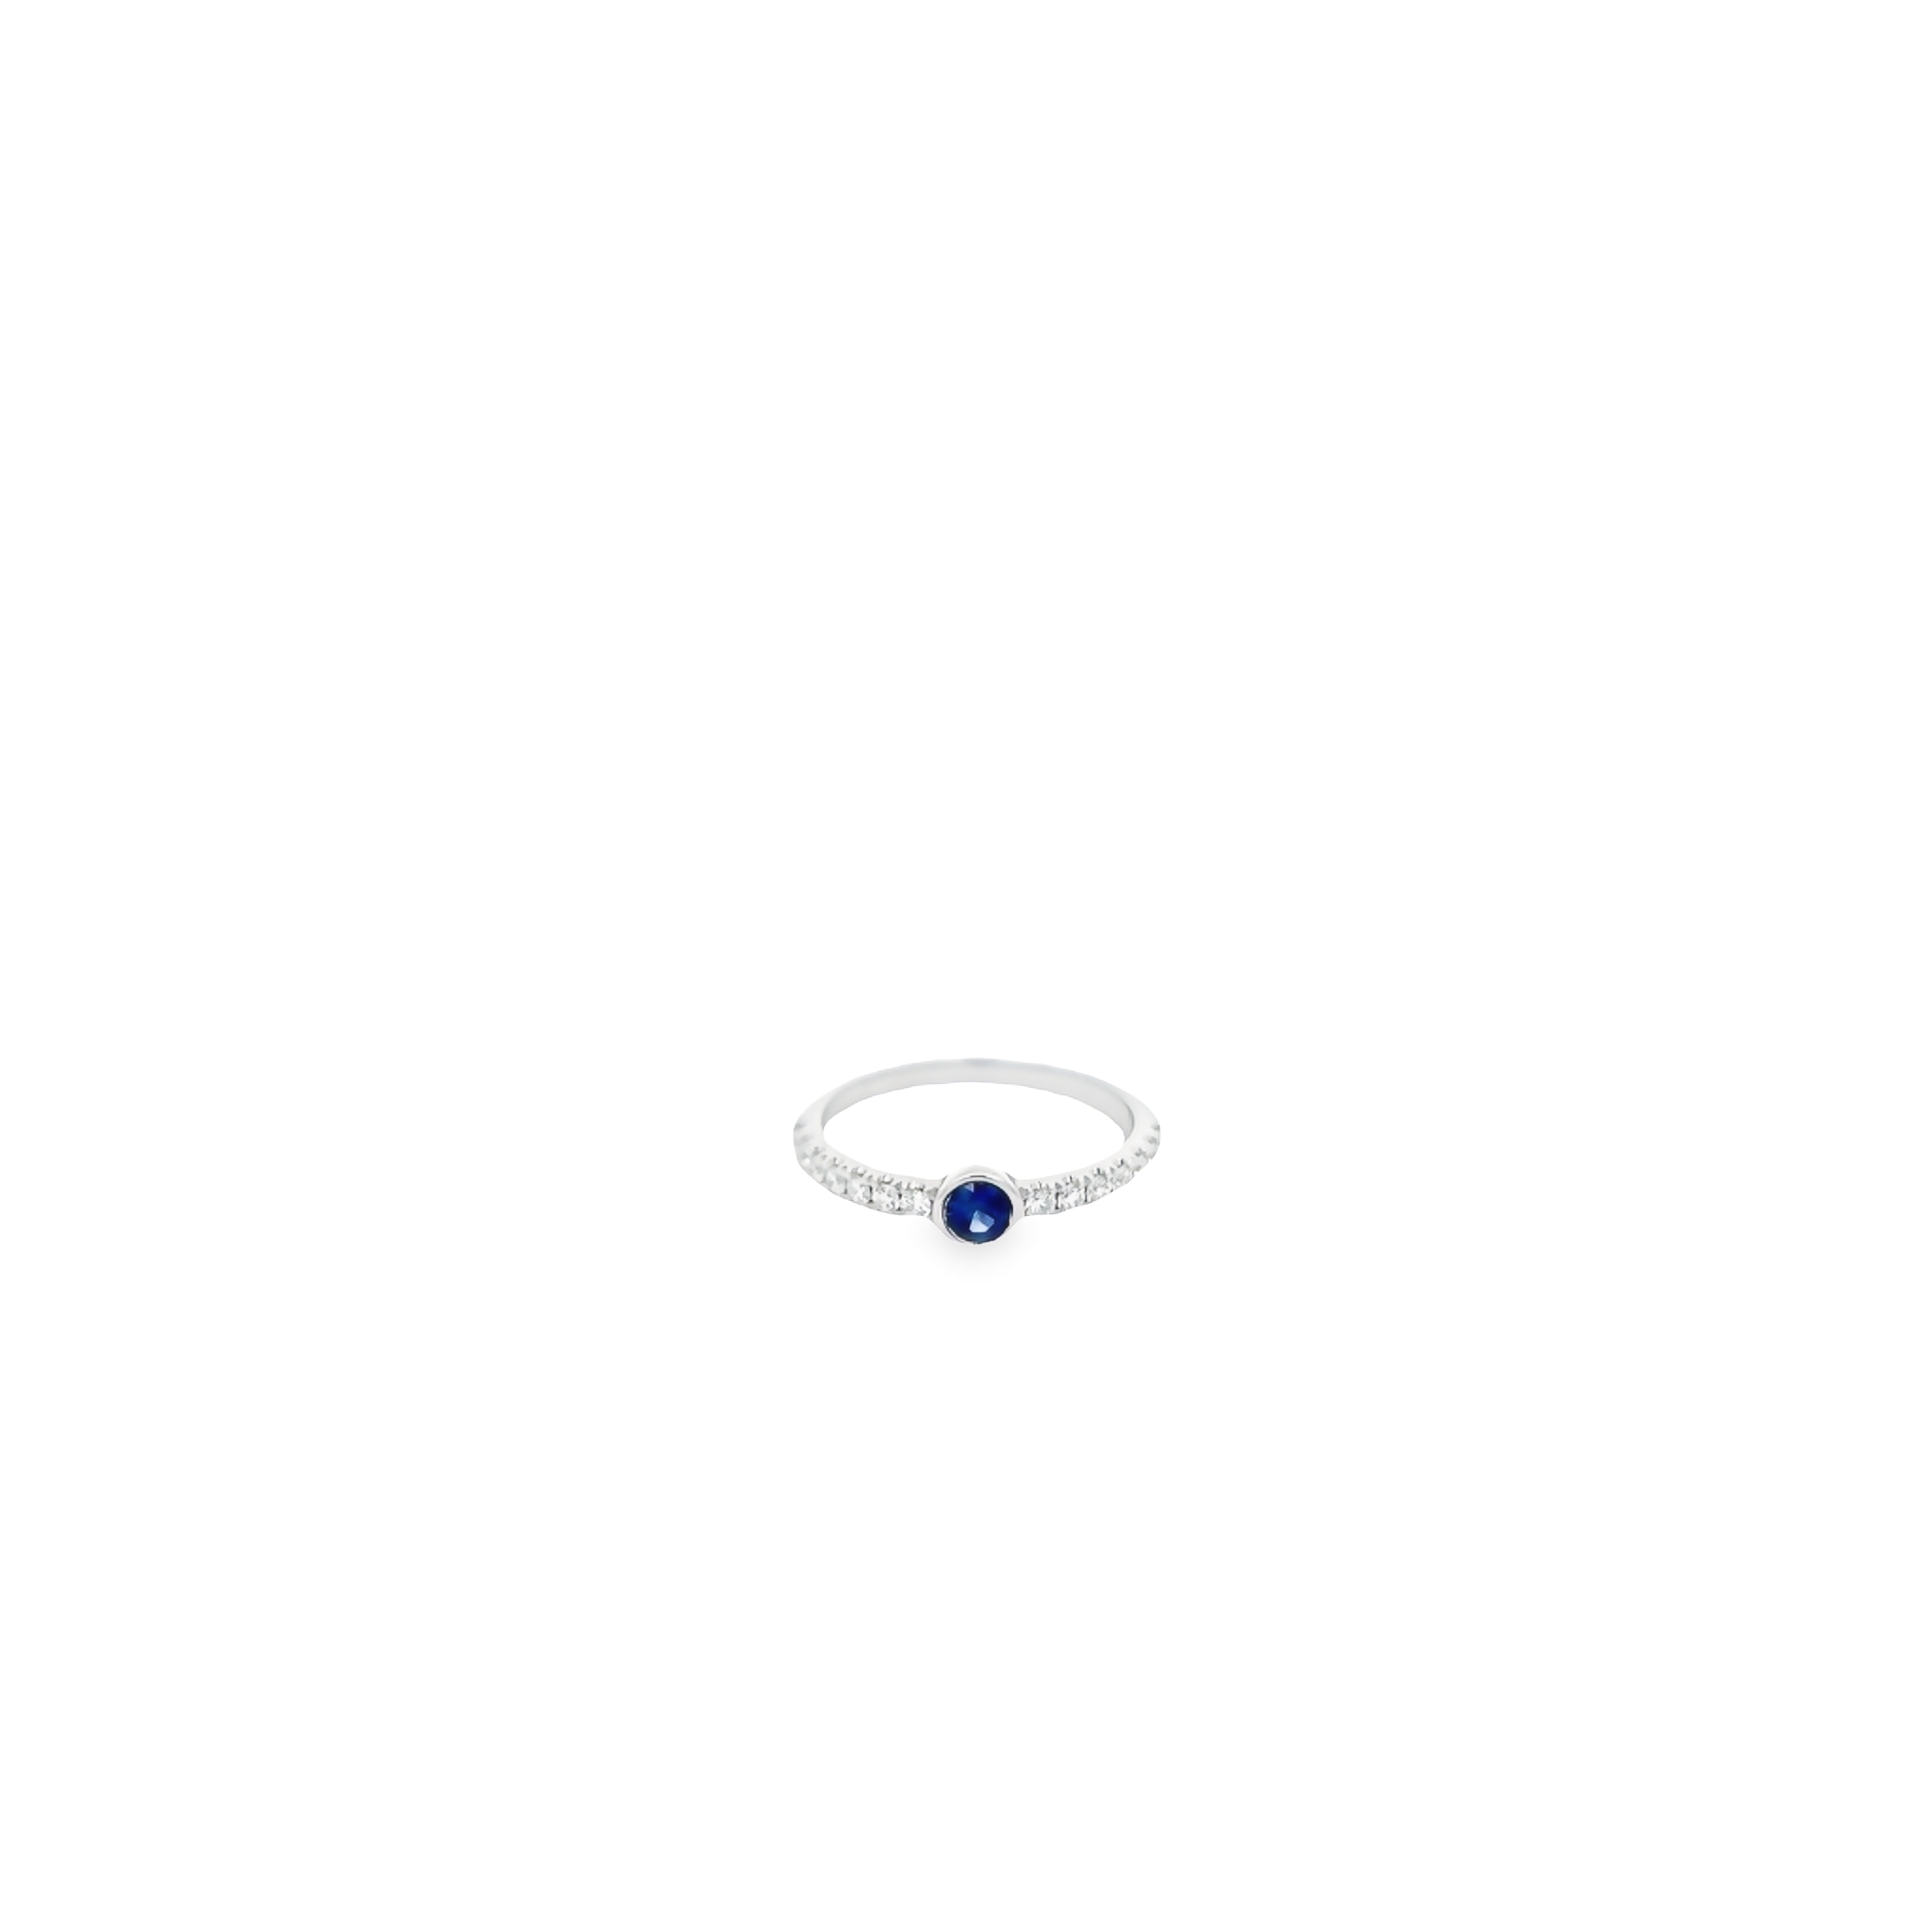 14 Karat White Gold Ring With One 0.26ct Round Mixed Cut Sapphire And 14=0.27 Total Weight Round Brilliant G Vs Diamonds. Size 6.5